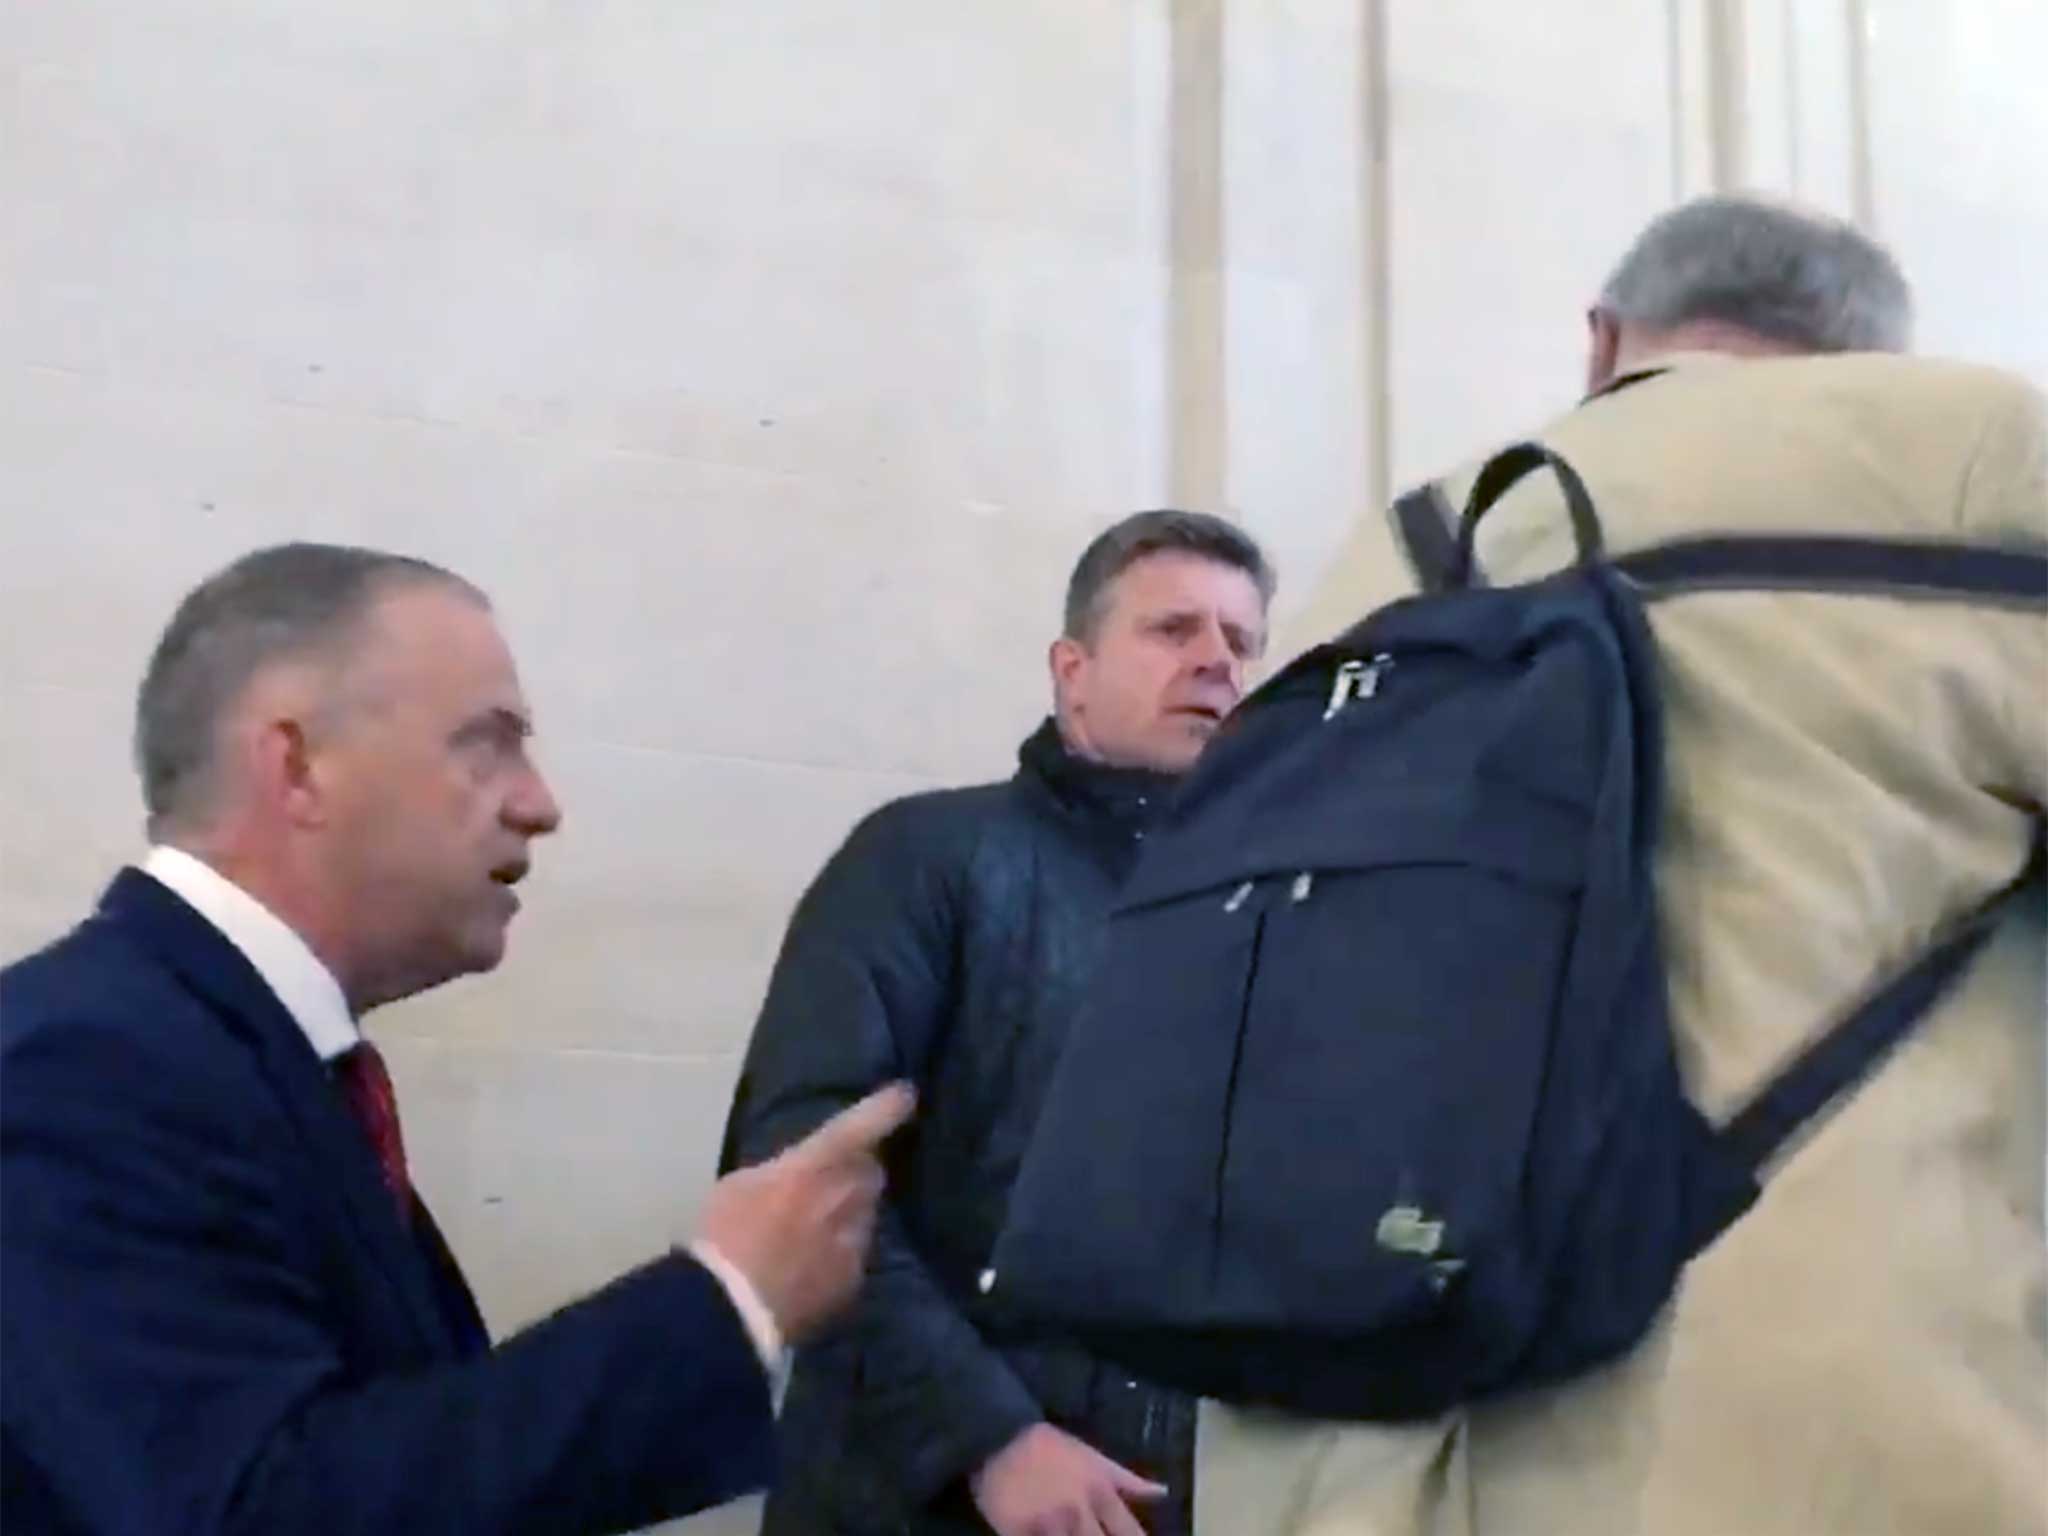 Mr Mann confronted Mr Livingstone while surrounded by journalists outside the BBC's offices in Millbank